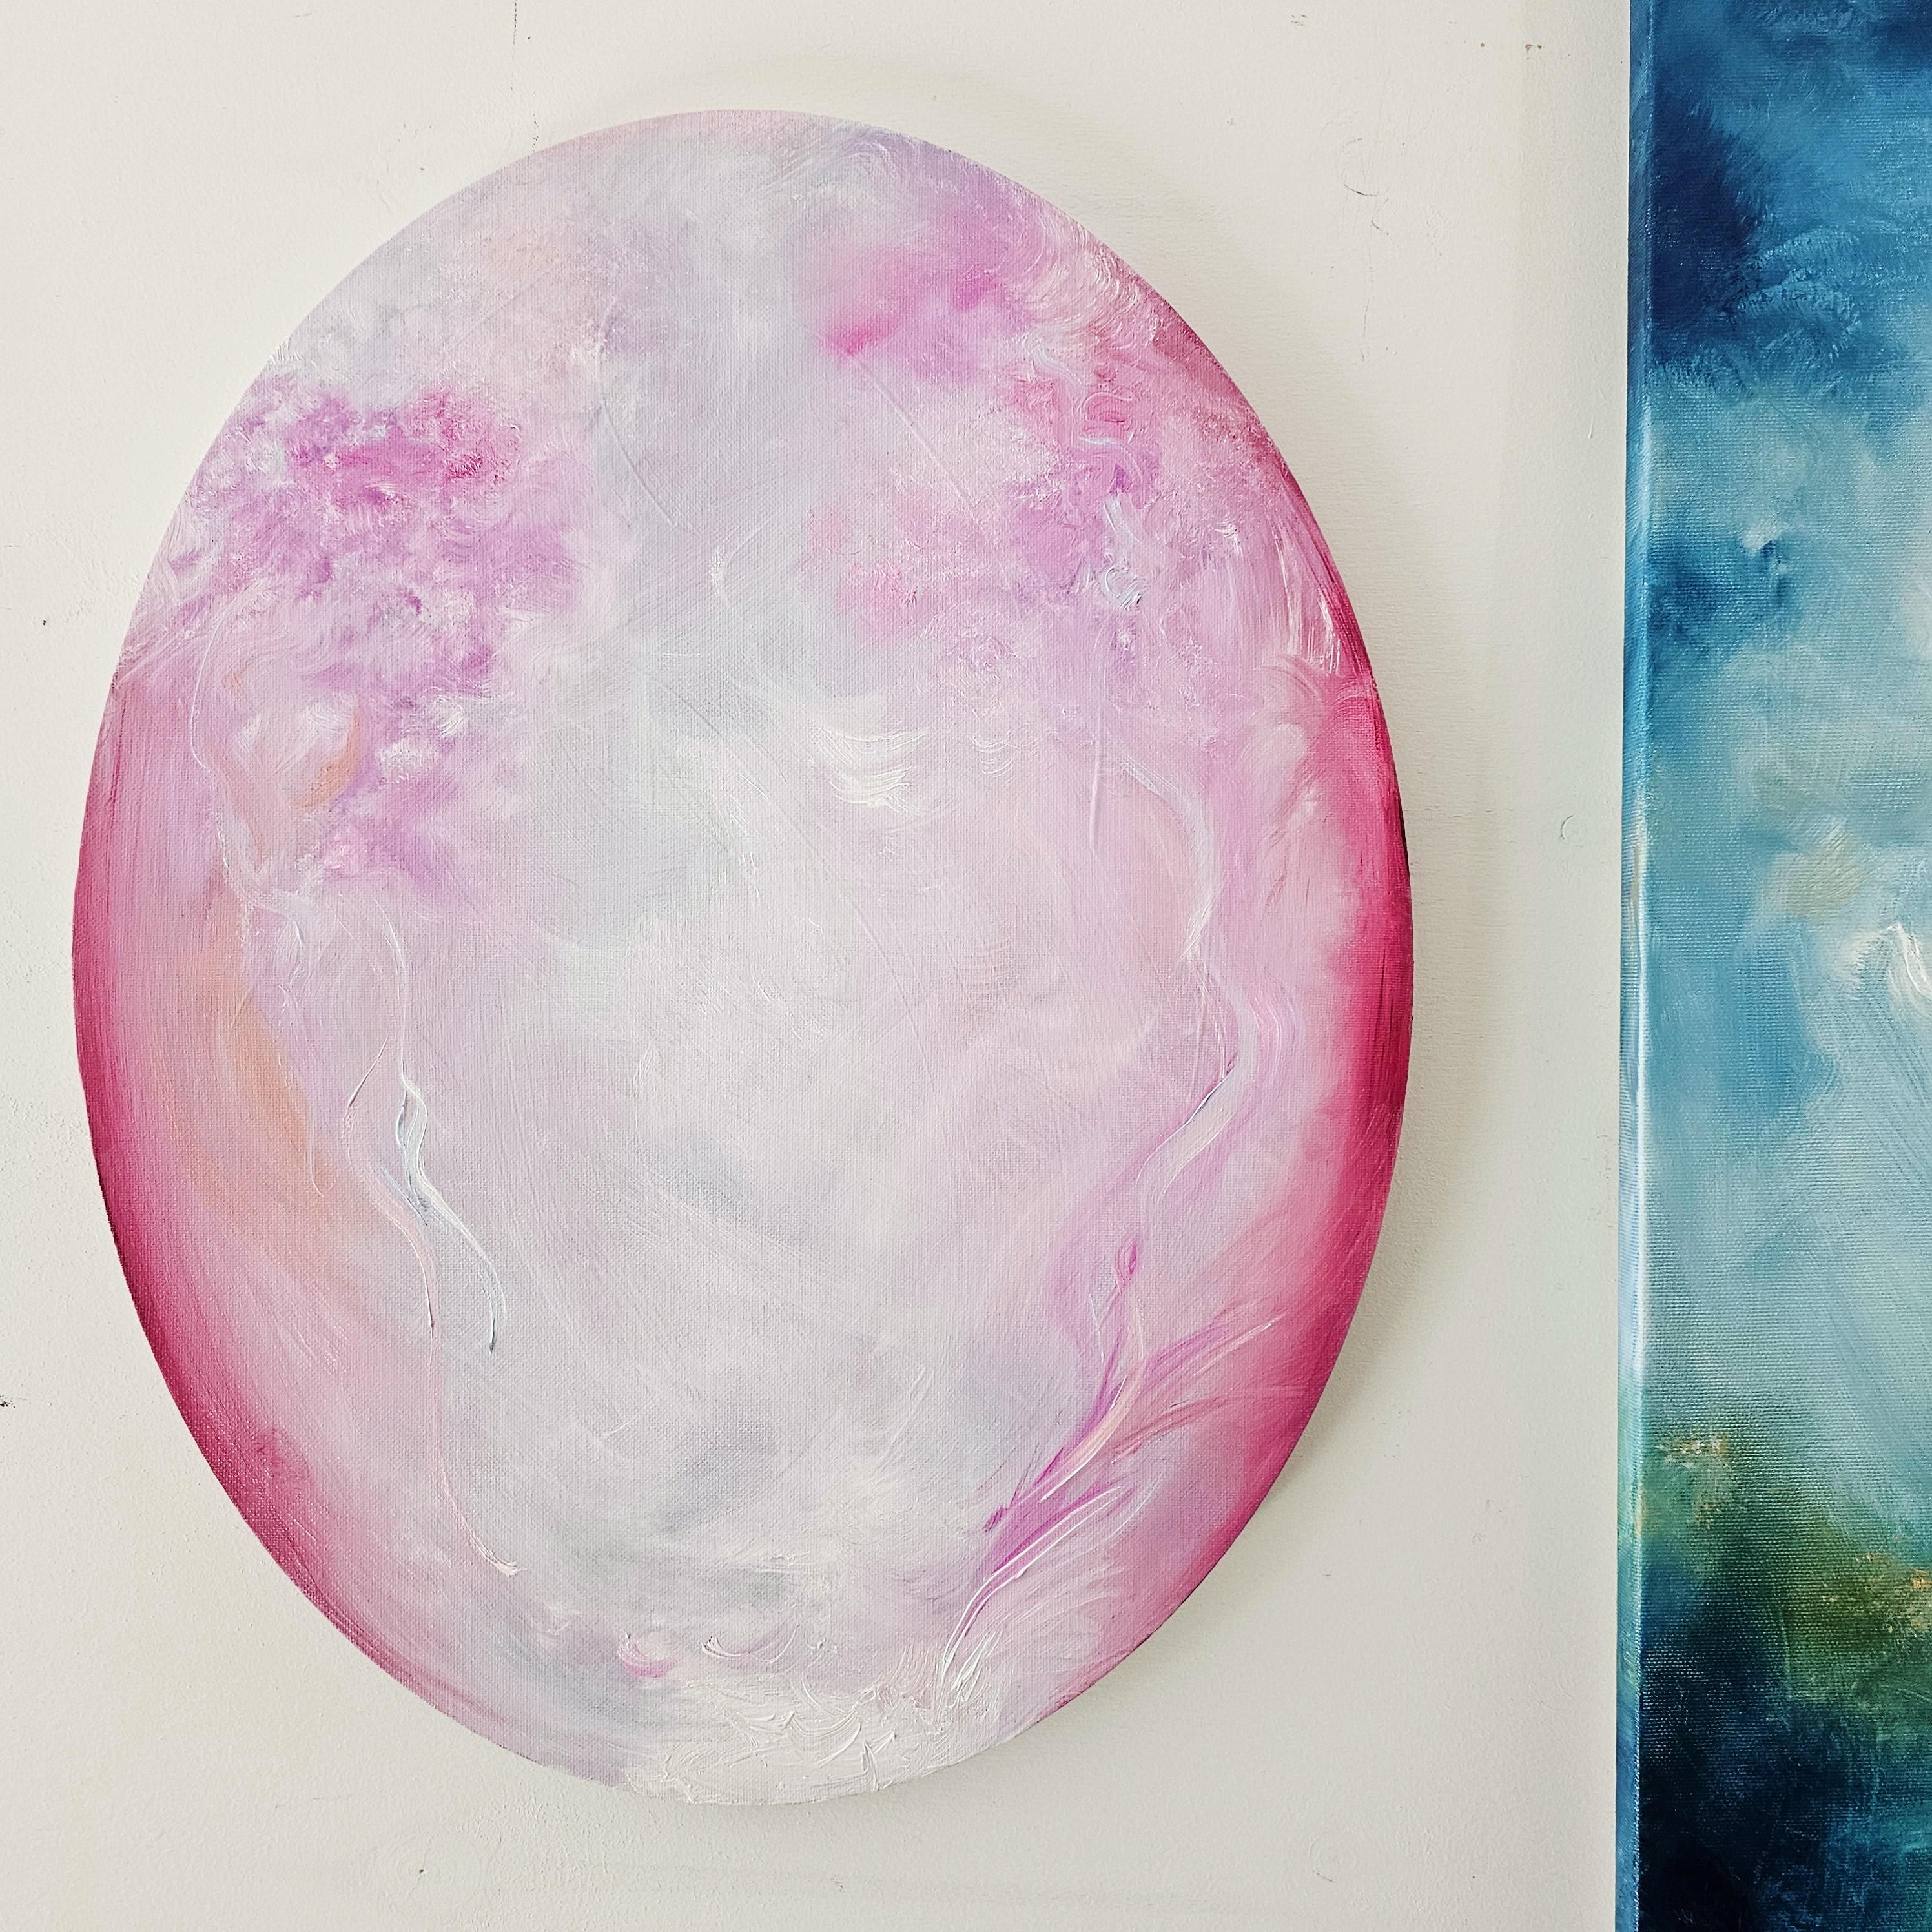 I fell in love - Pink oval abstract painting - Abstract Painting by Jennifer L. Baker